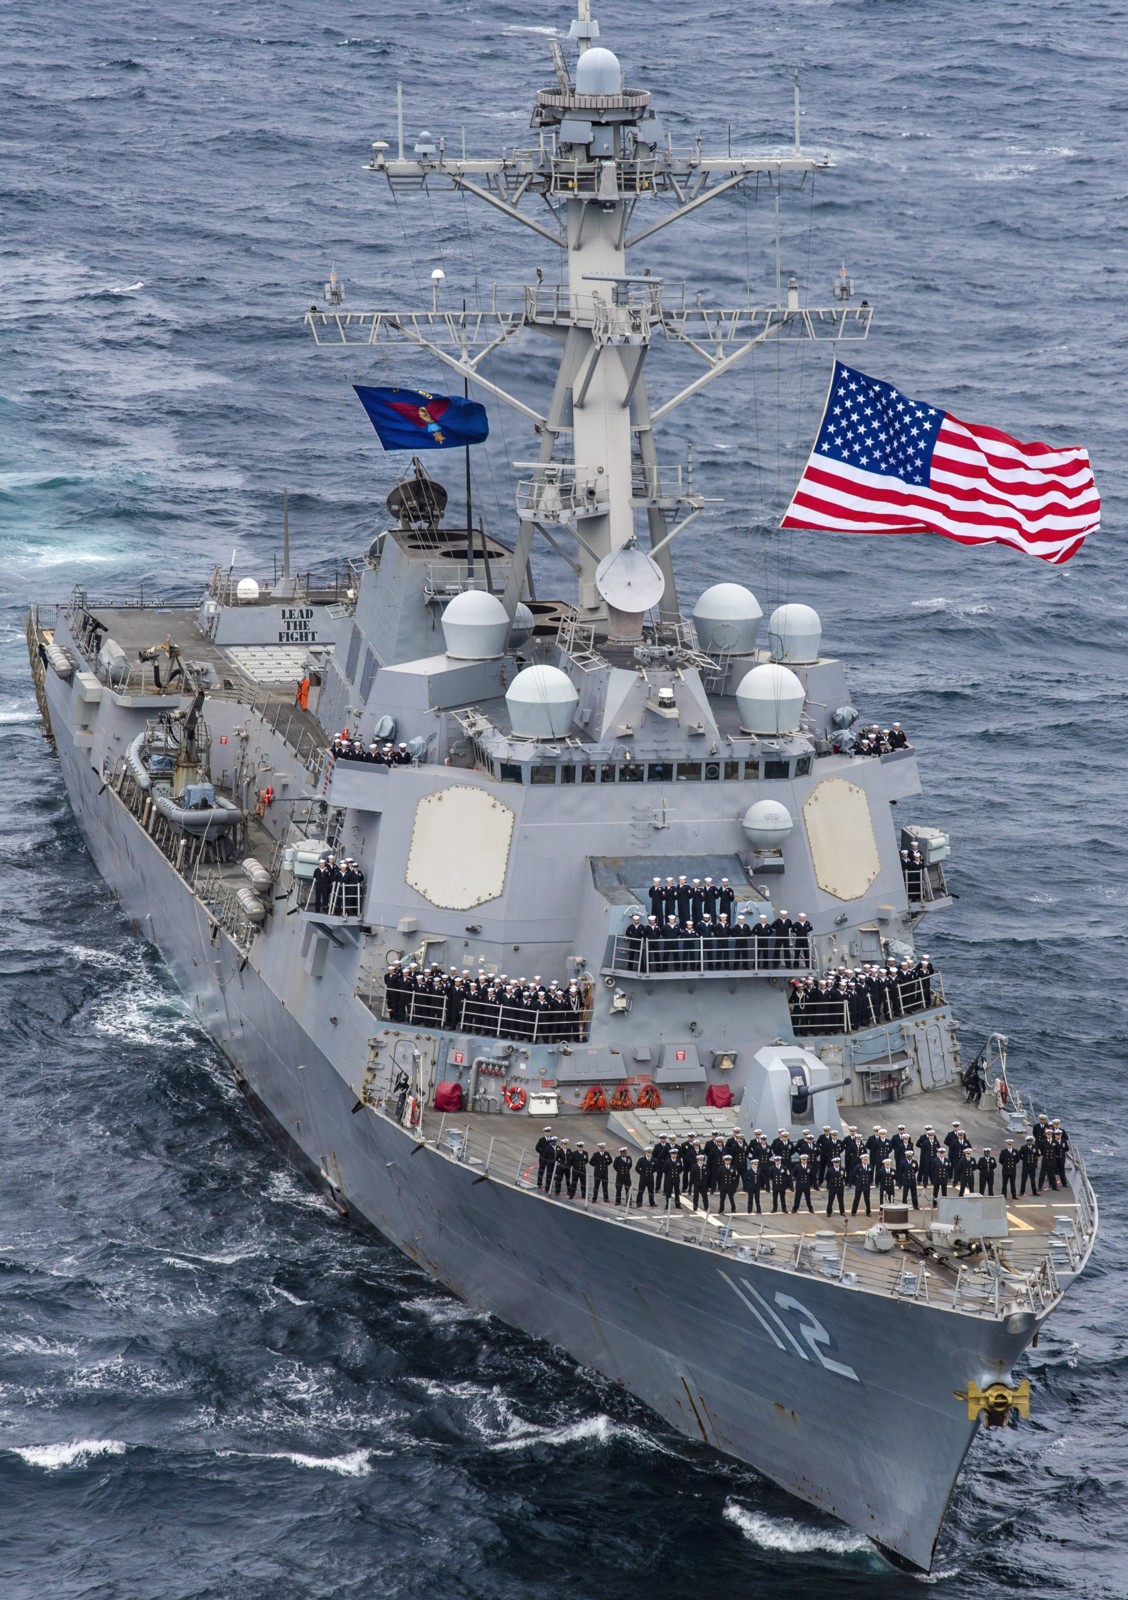 ddg-112 uss michael murphy arleigh burke class guided missile destroyer aegis us navy photo exercise 64